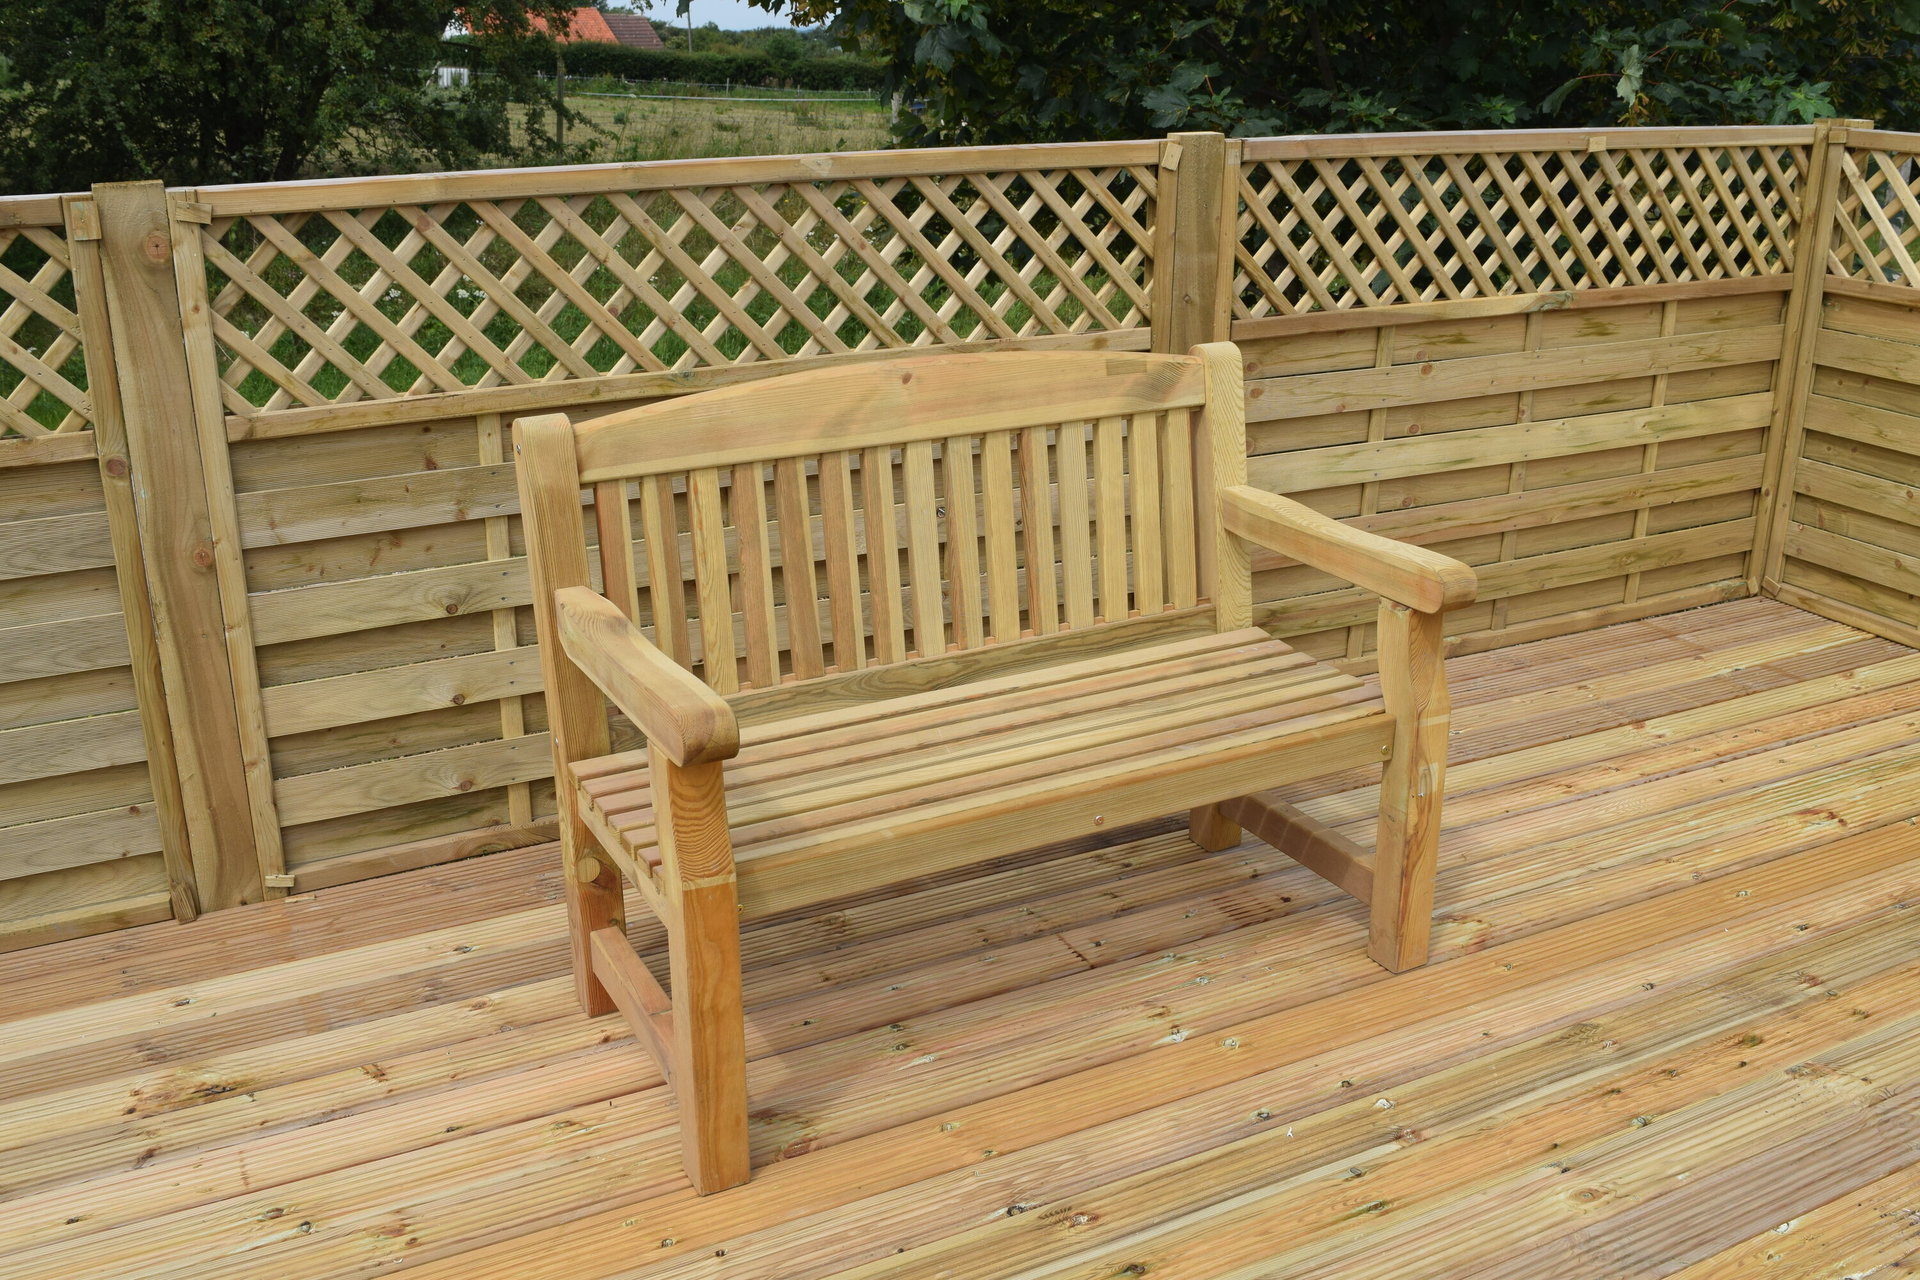 A wooden bench on a decking